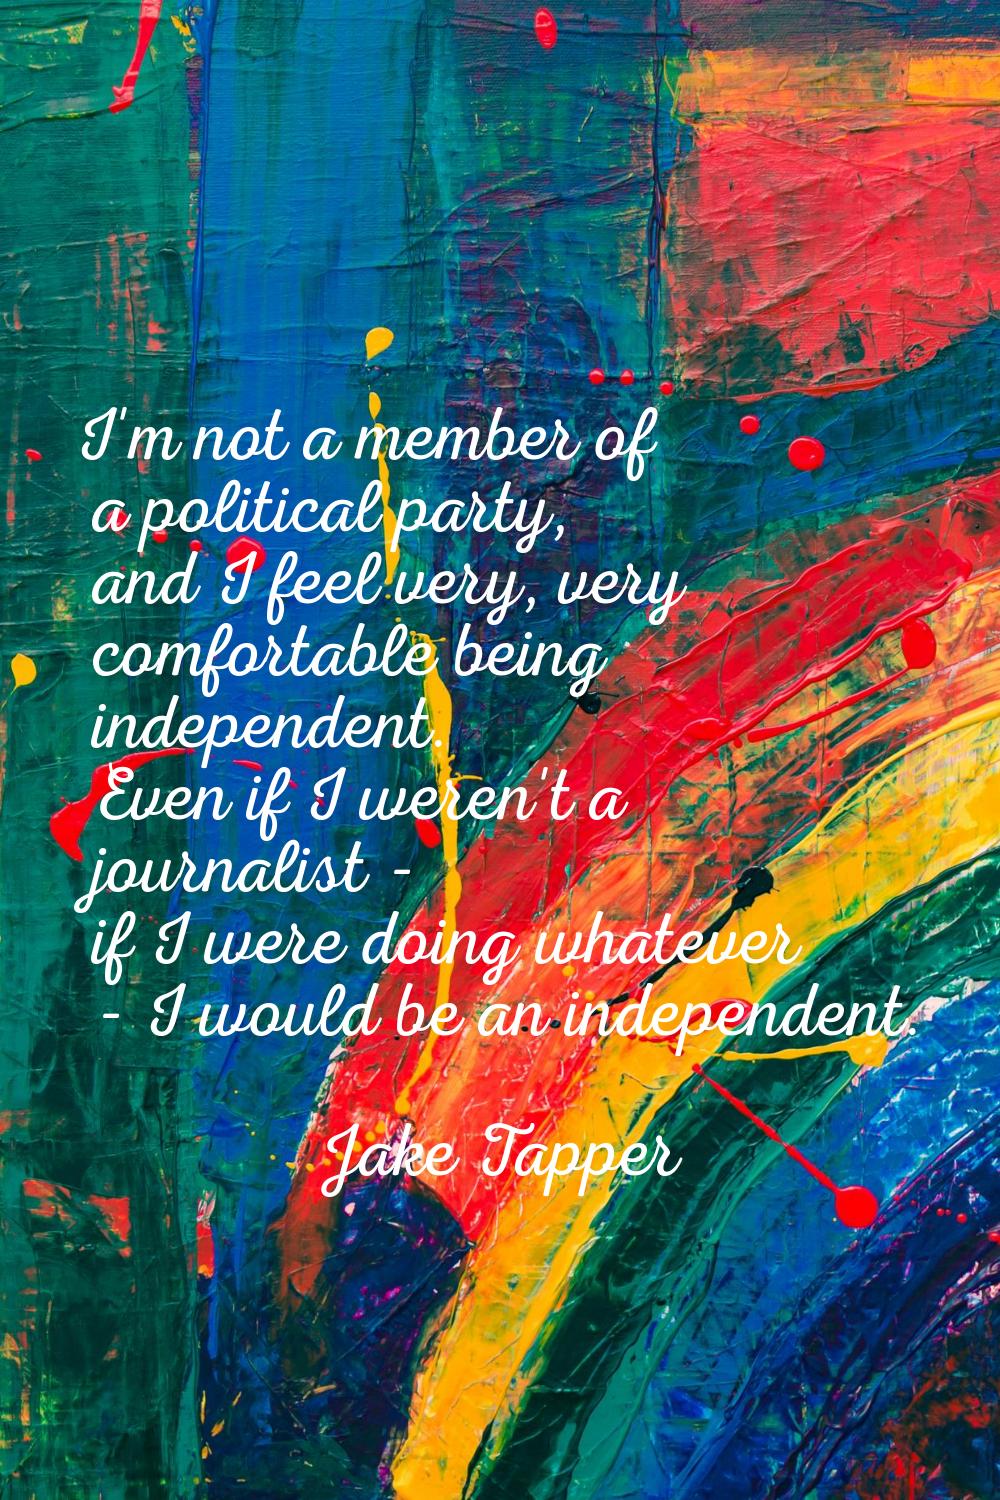 I'm not a member of a political party, and I feel very, very comfortable being independent. Even if